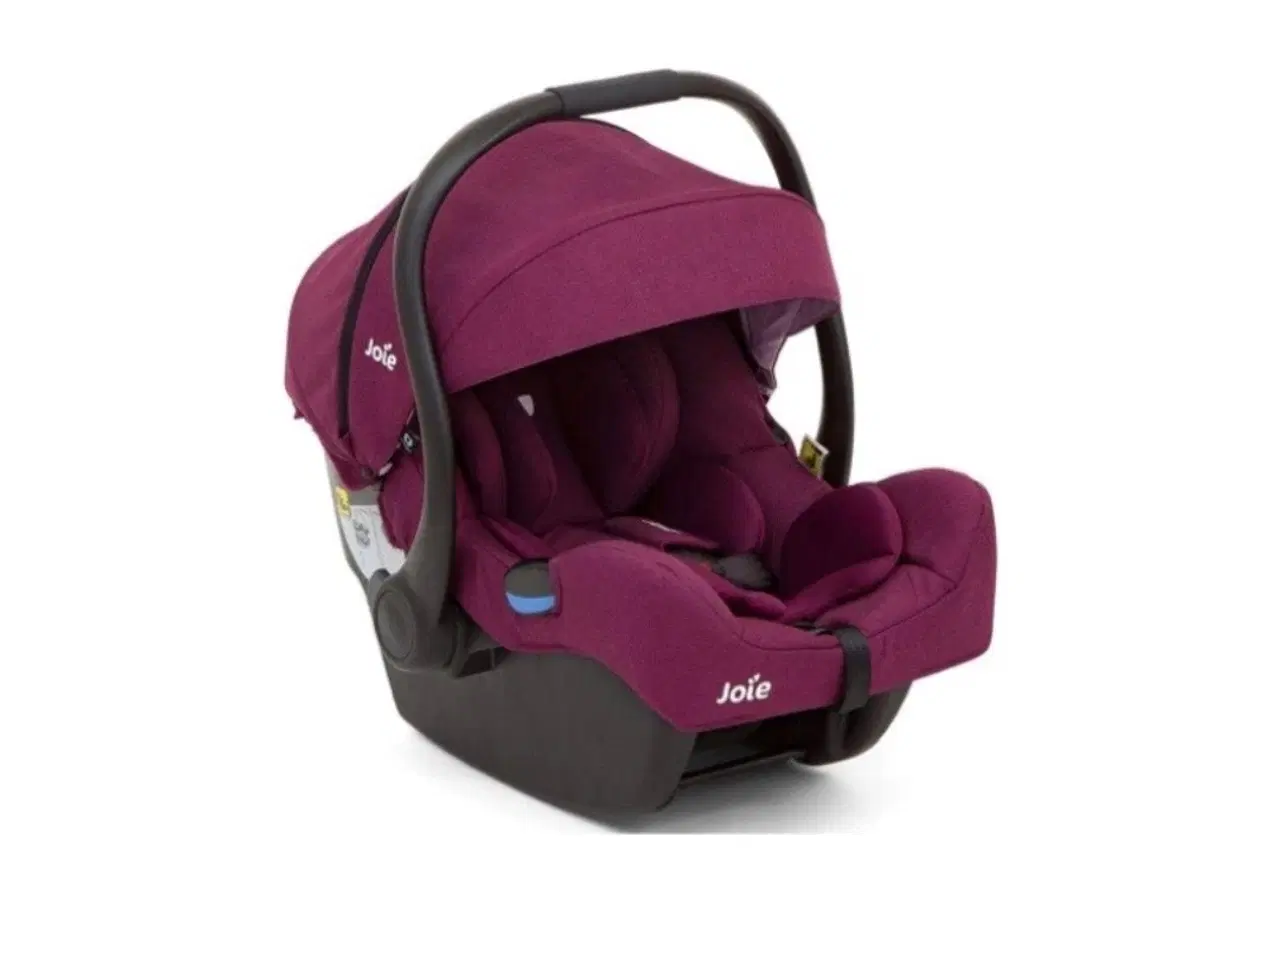 Billede 1 - BABY CARSEAT from birth to 13kg Max 85cm